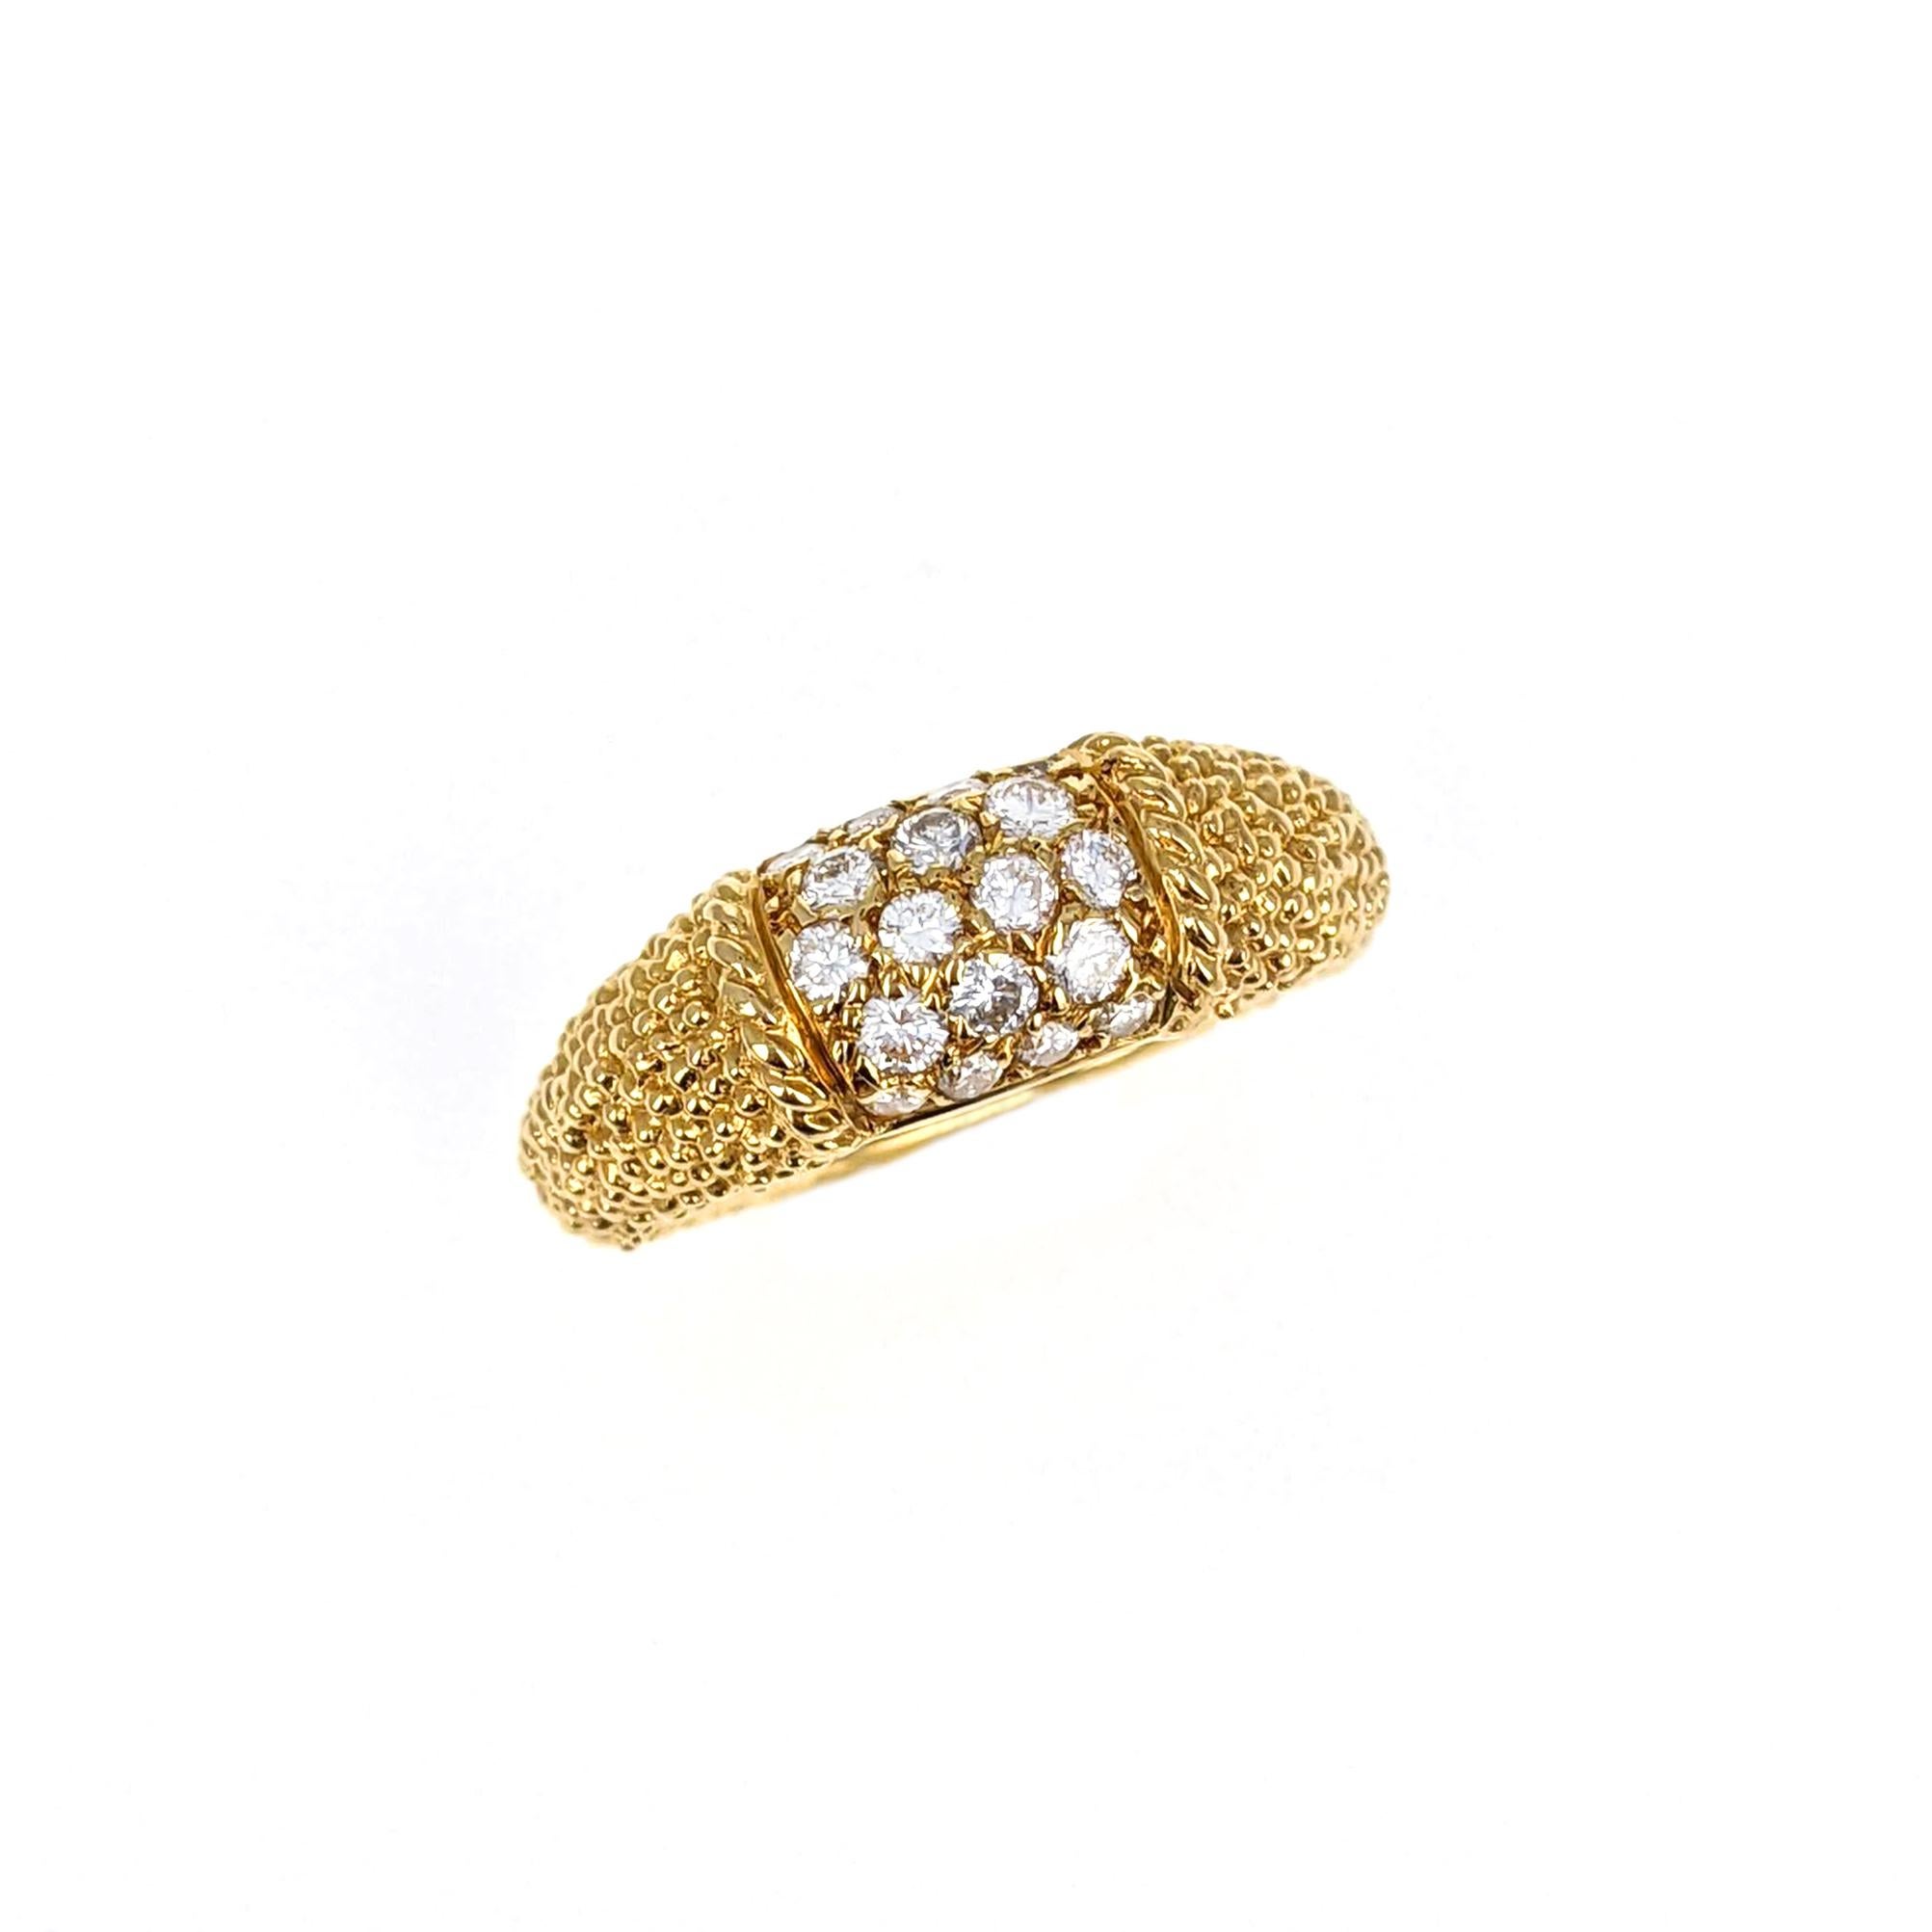 This classic Philippine ring from Van Cleef and Arpels features a center section with round diamonds weighing approximately .5 carats. The textured band is made of 18 karat yellow gold. The piece is signed with partial maker's mark, numbered, and